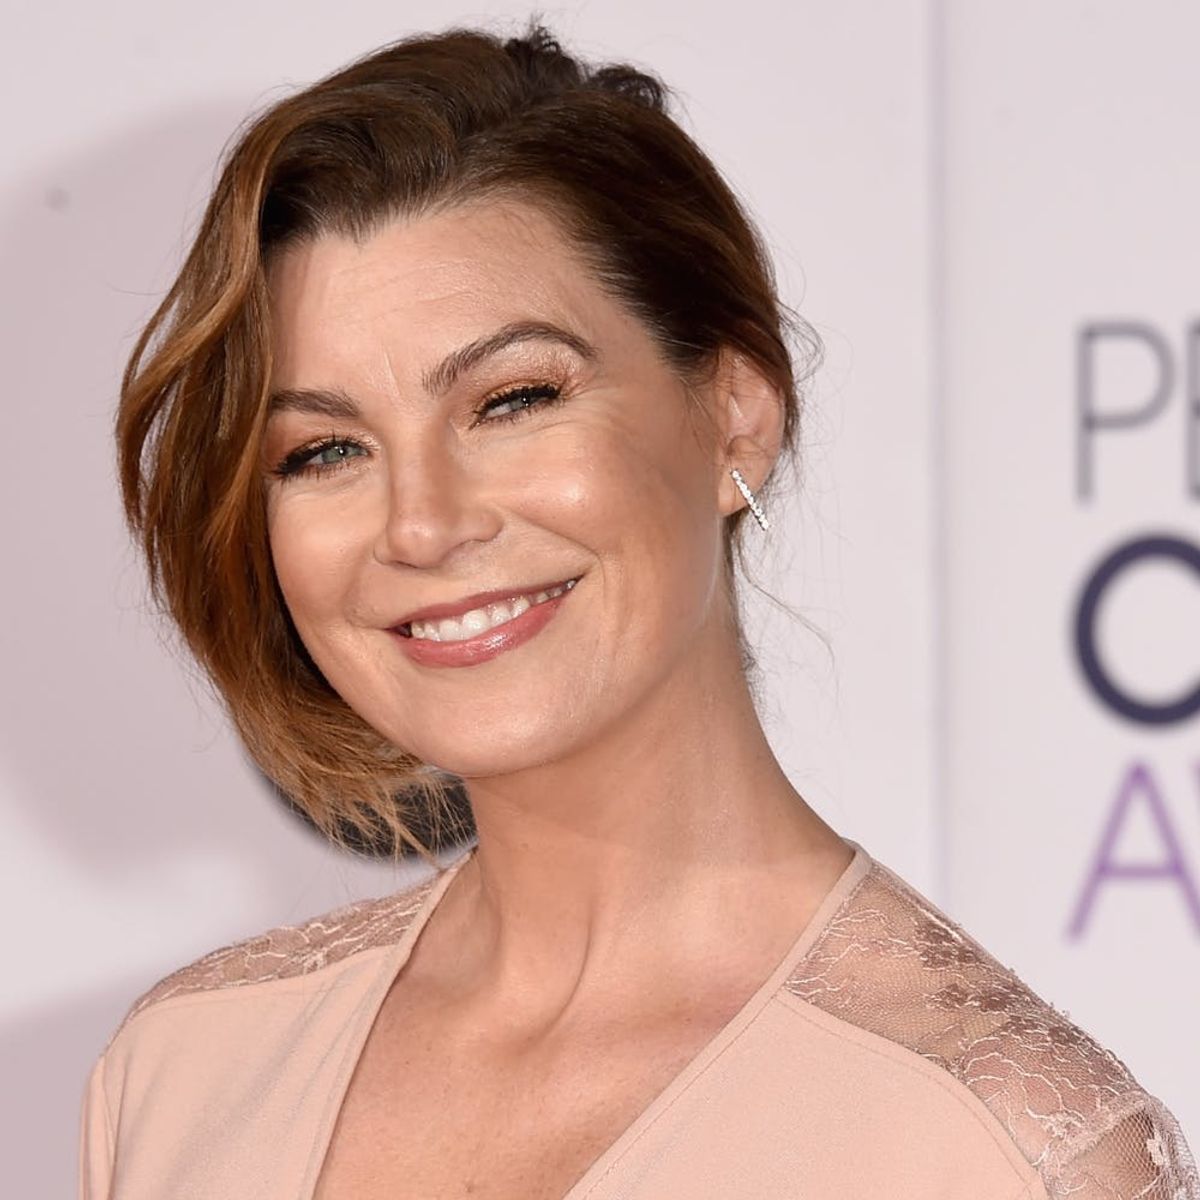 Ellen Pompeo Just Signed on for Two More Years of ‘Grey’s Anatomy’